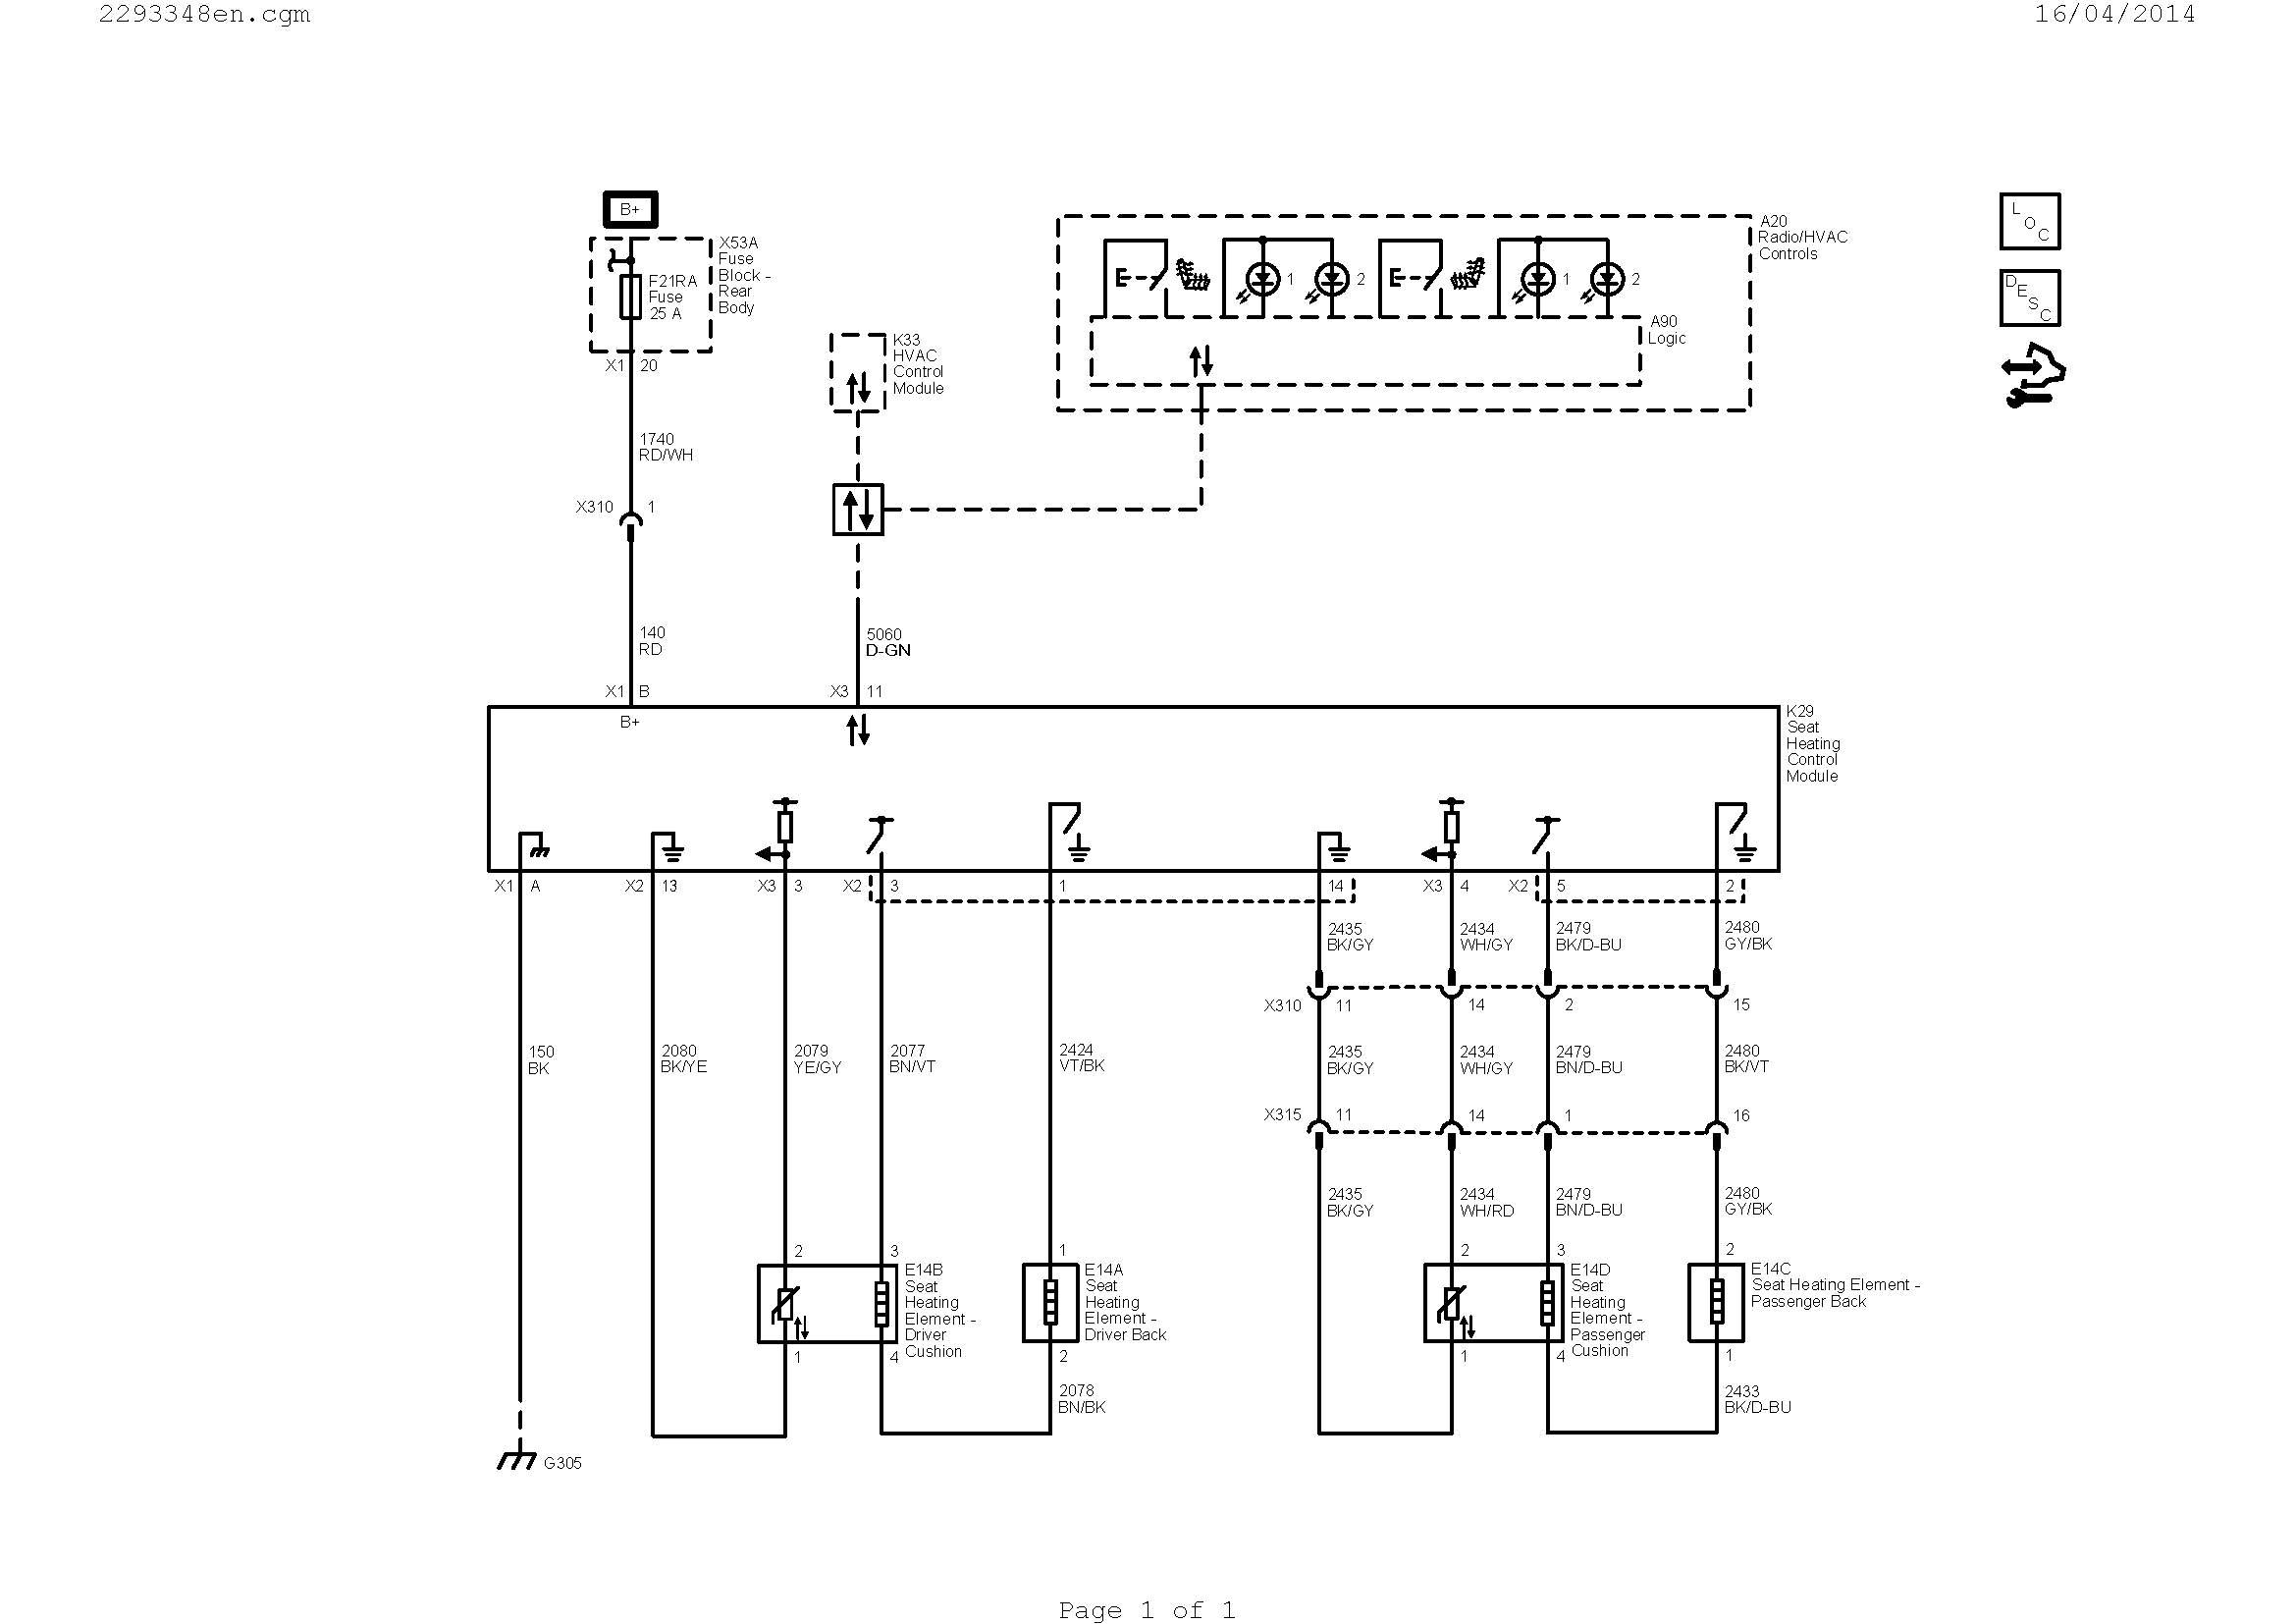 Wiring Diagram For A Relay Switch Save Wiring Diagram Ac Valid Hvac Diagram Best Hvac Diagram